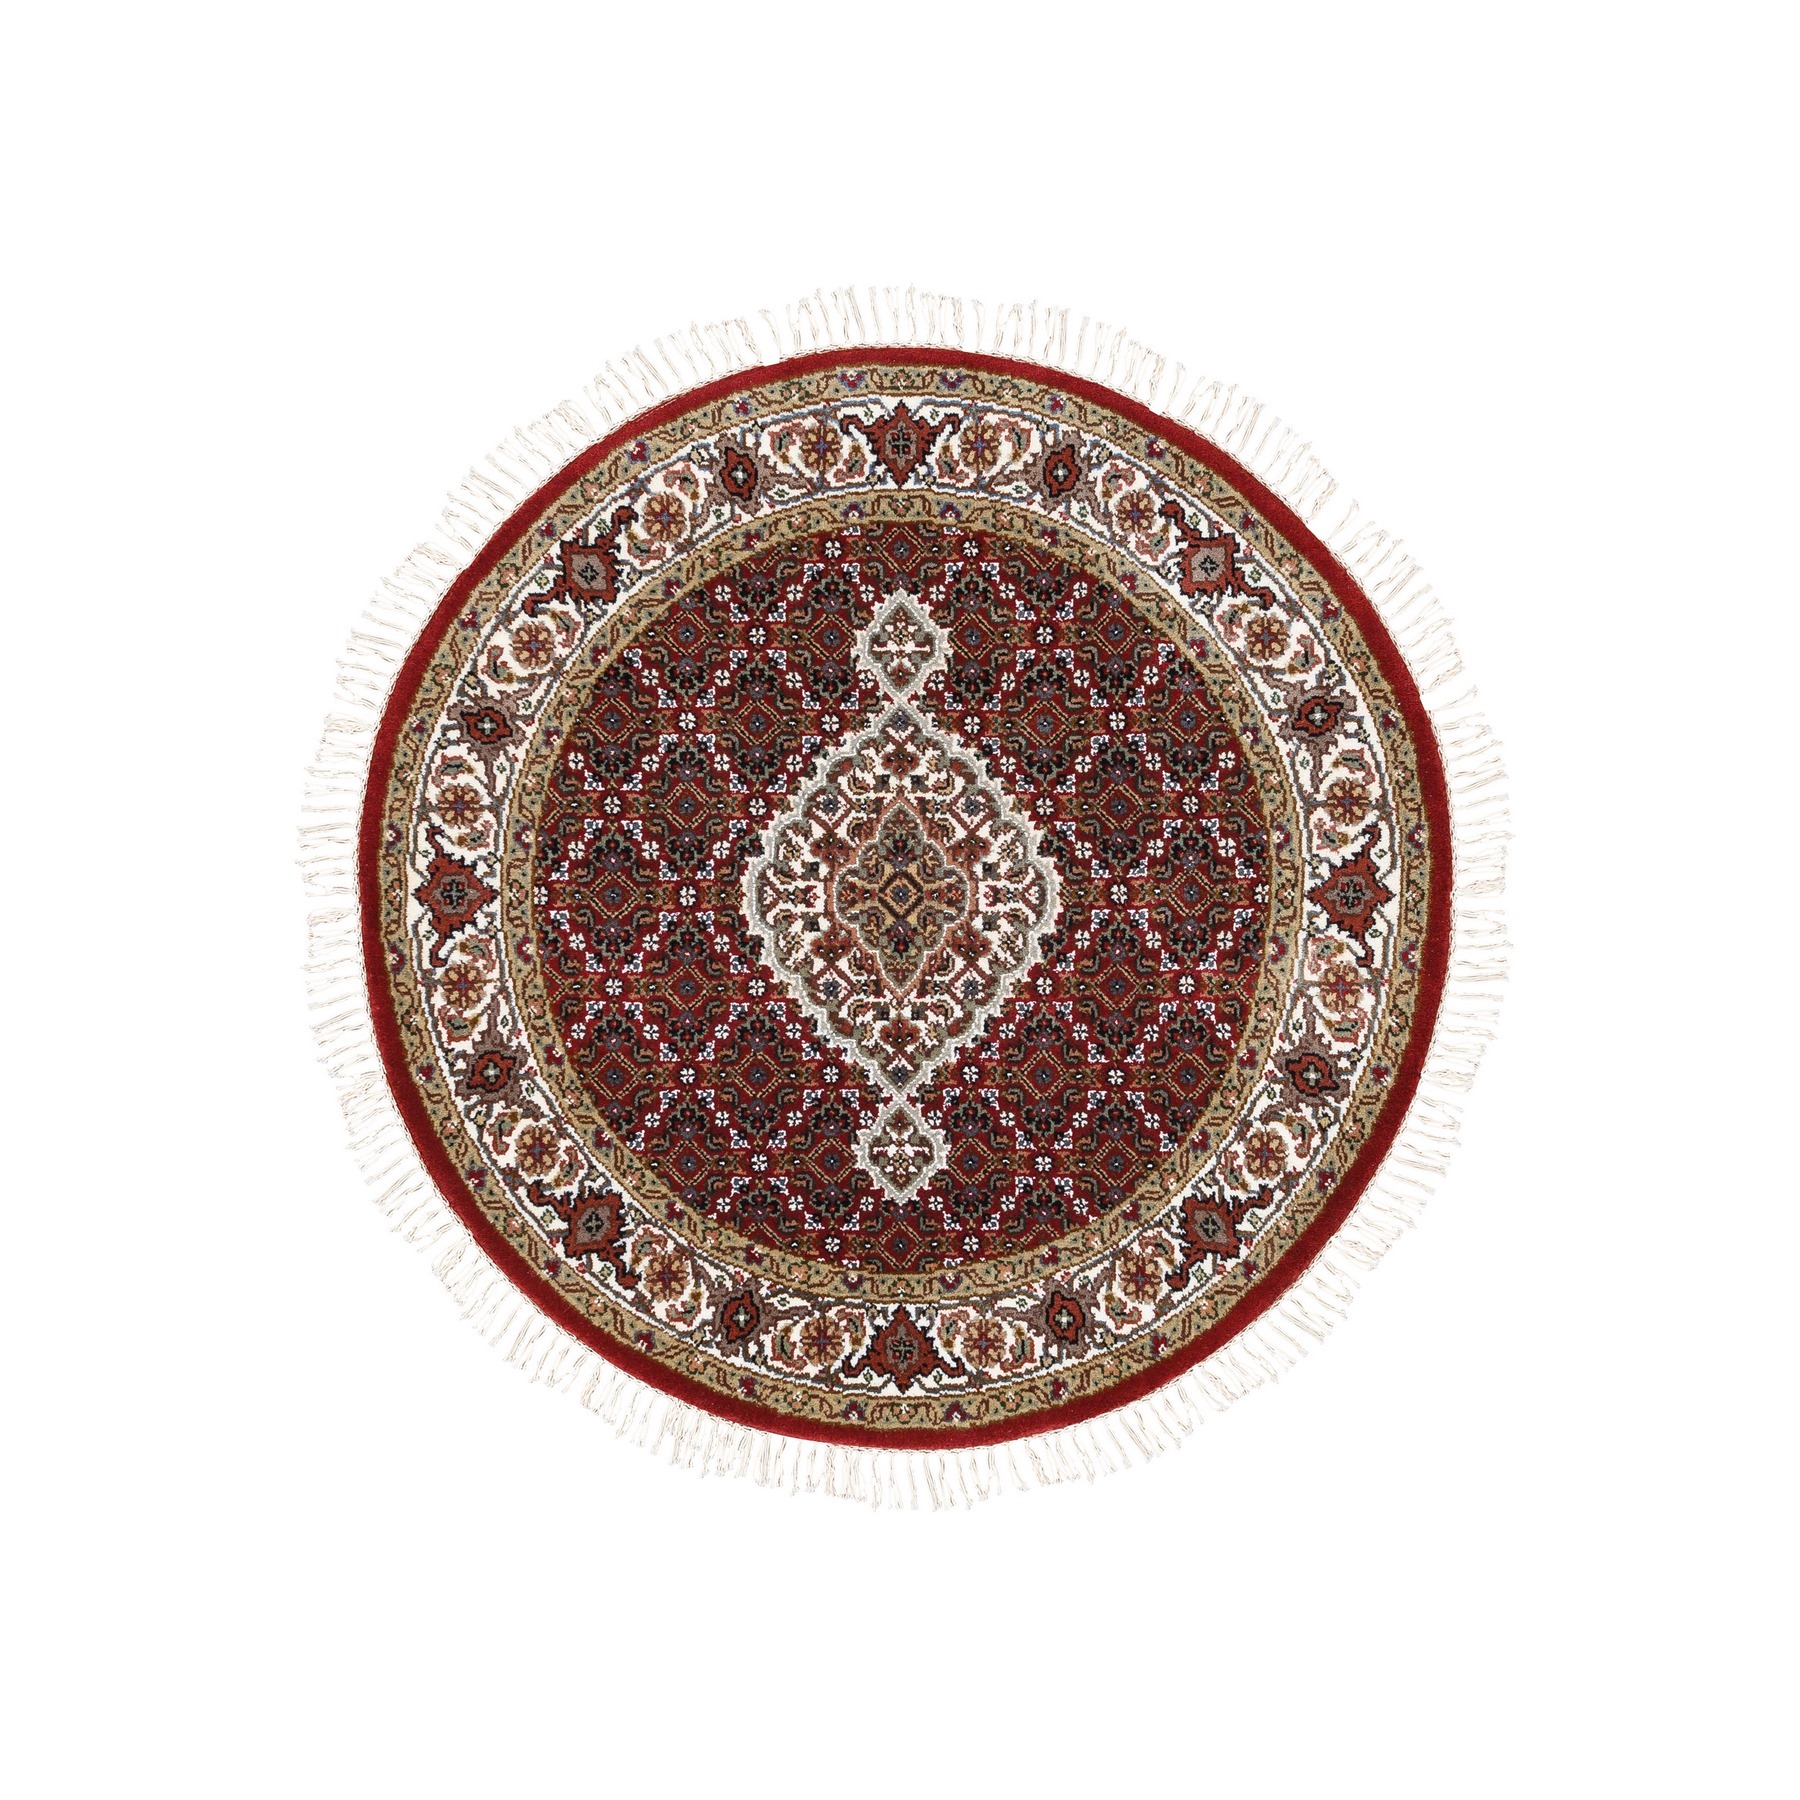 Pirniakan Collection Hand Knotted Red Rug No: 1124912